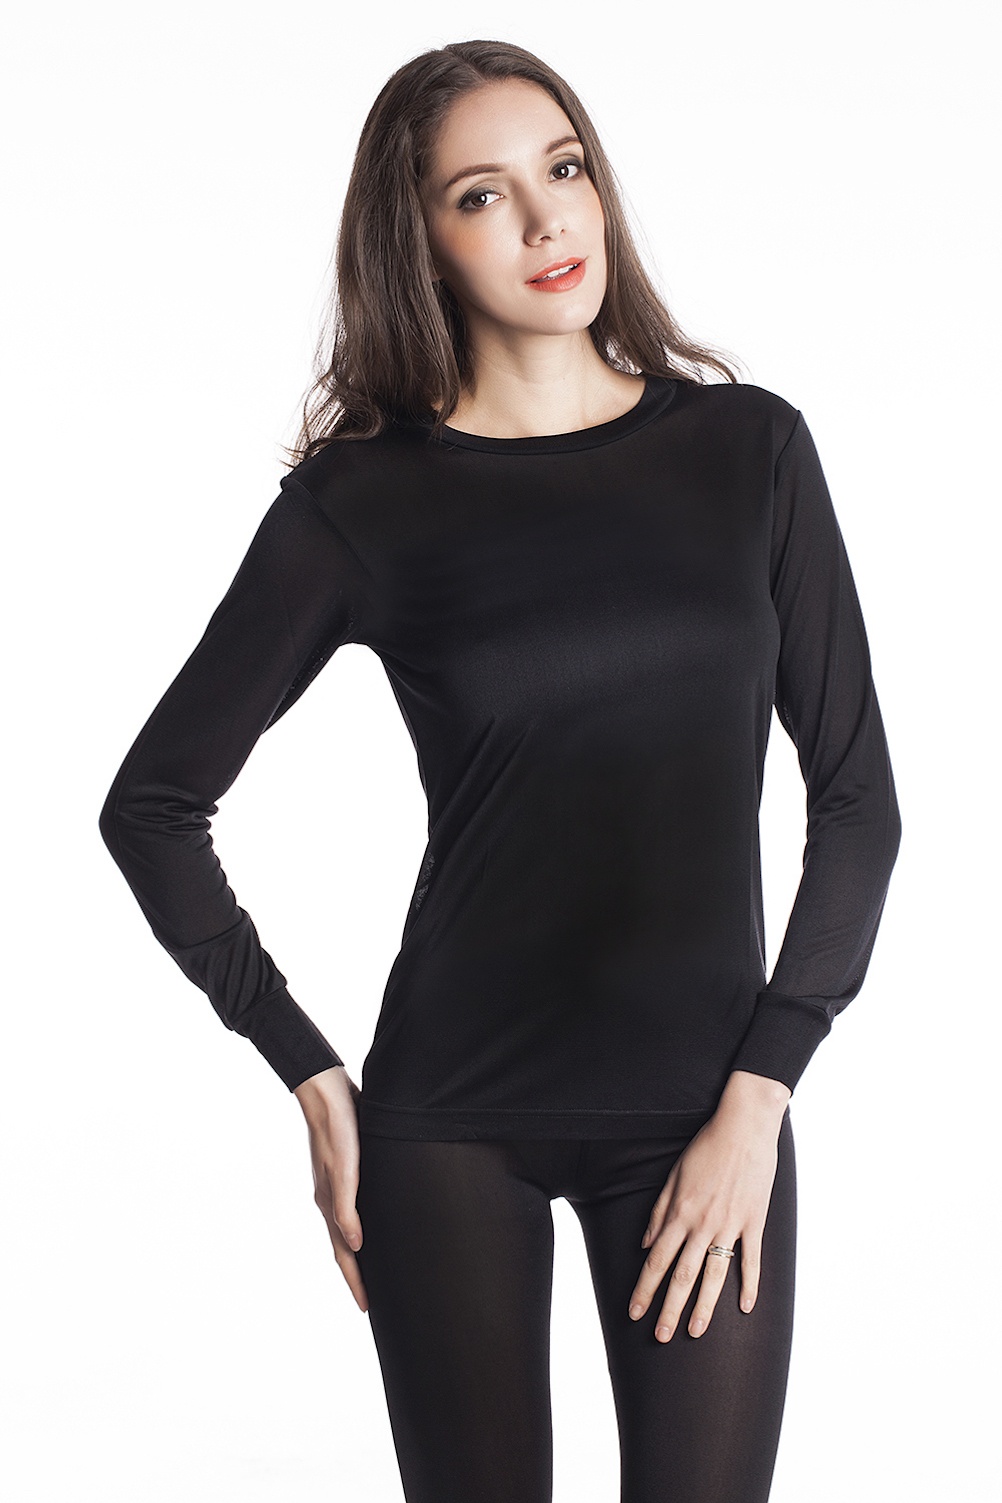 Living Made Easy - Womens Pure Silk Thermals)